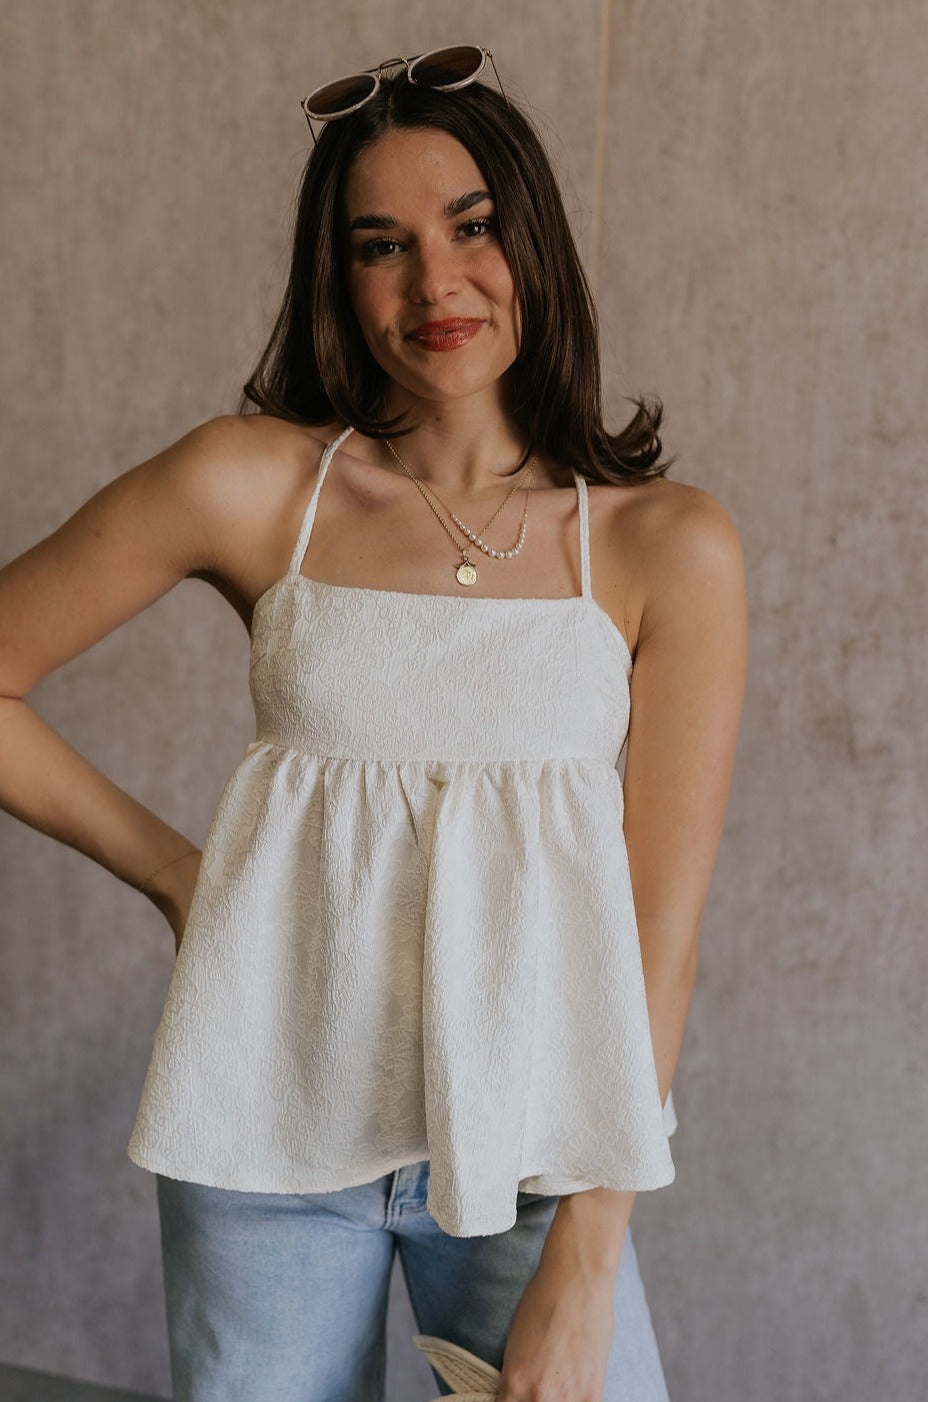 Front view of female model wearing the Sydney Cream Floral Sleeveless Tank which features Cream Floral Fabric Design, Square Neckline, Adjustable Tie Straps and Open Back Design.